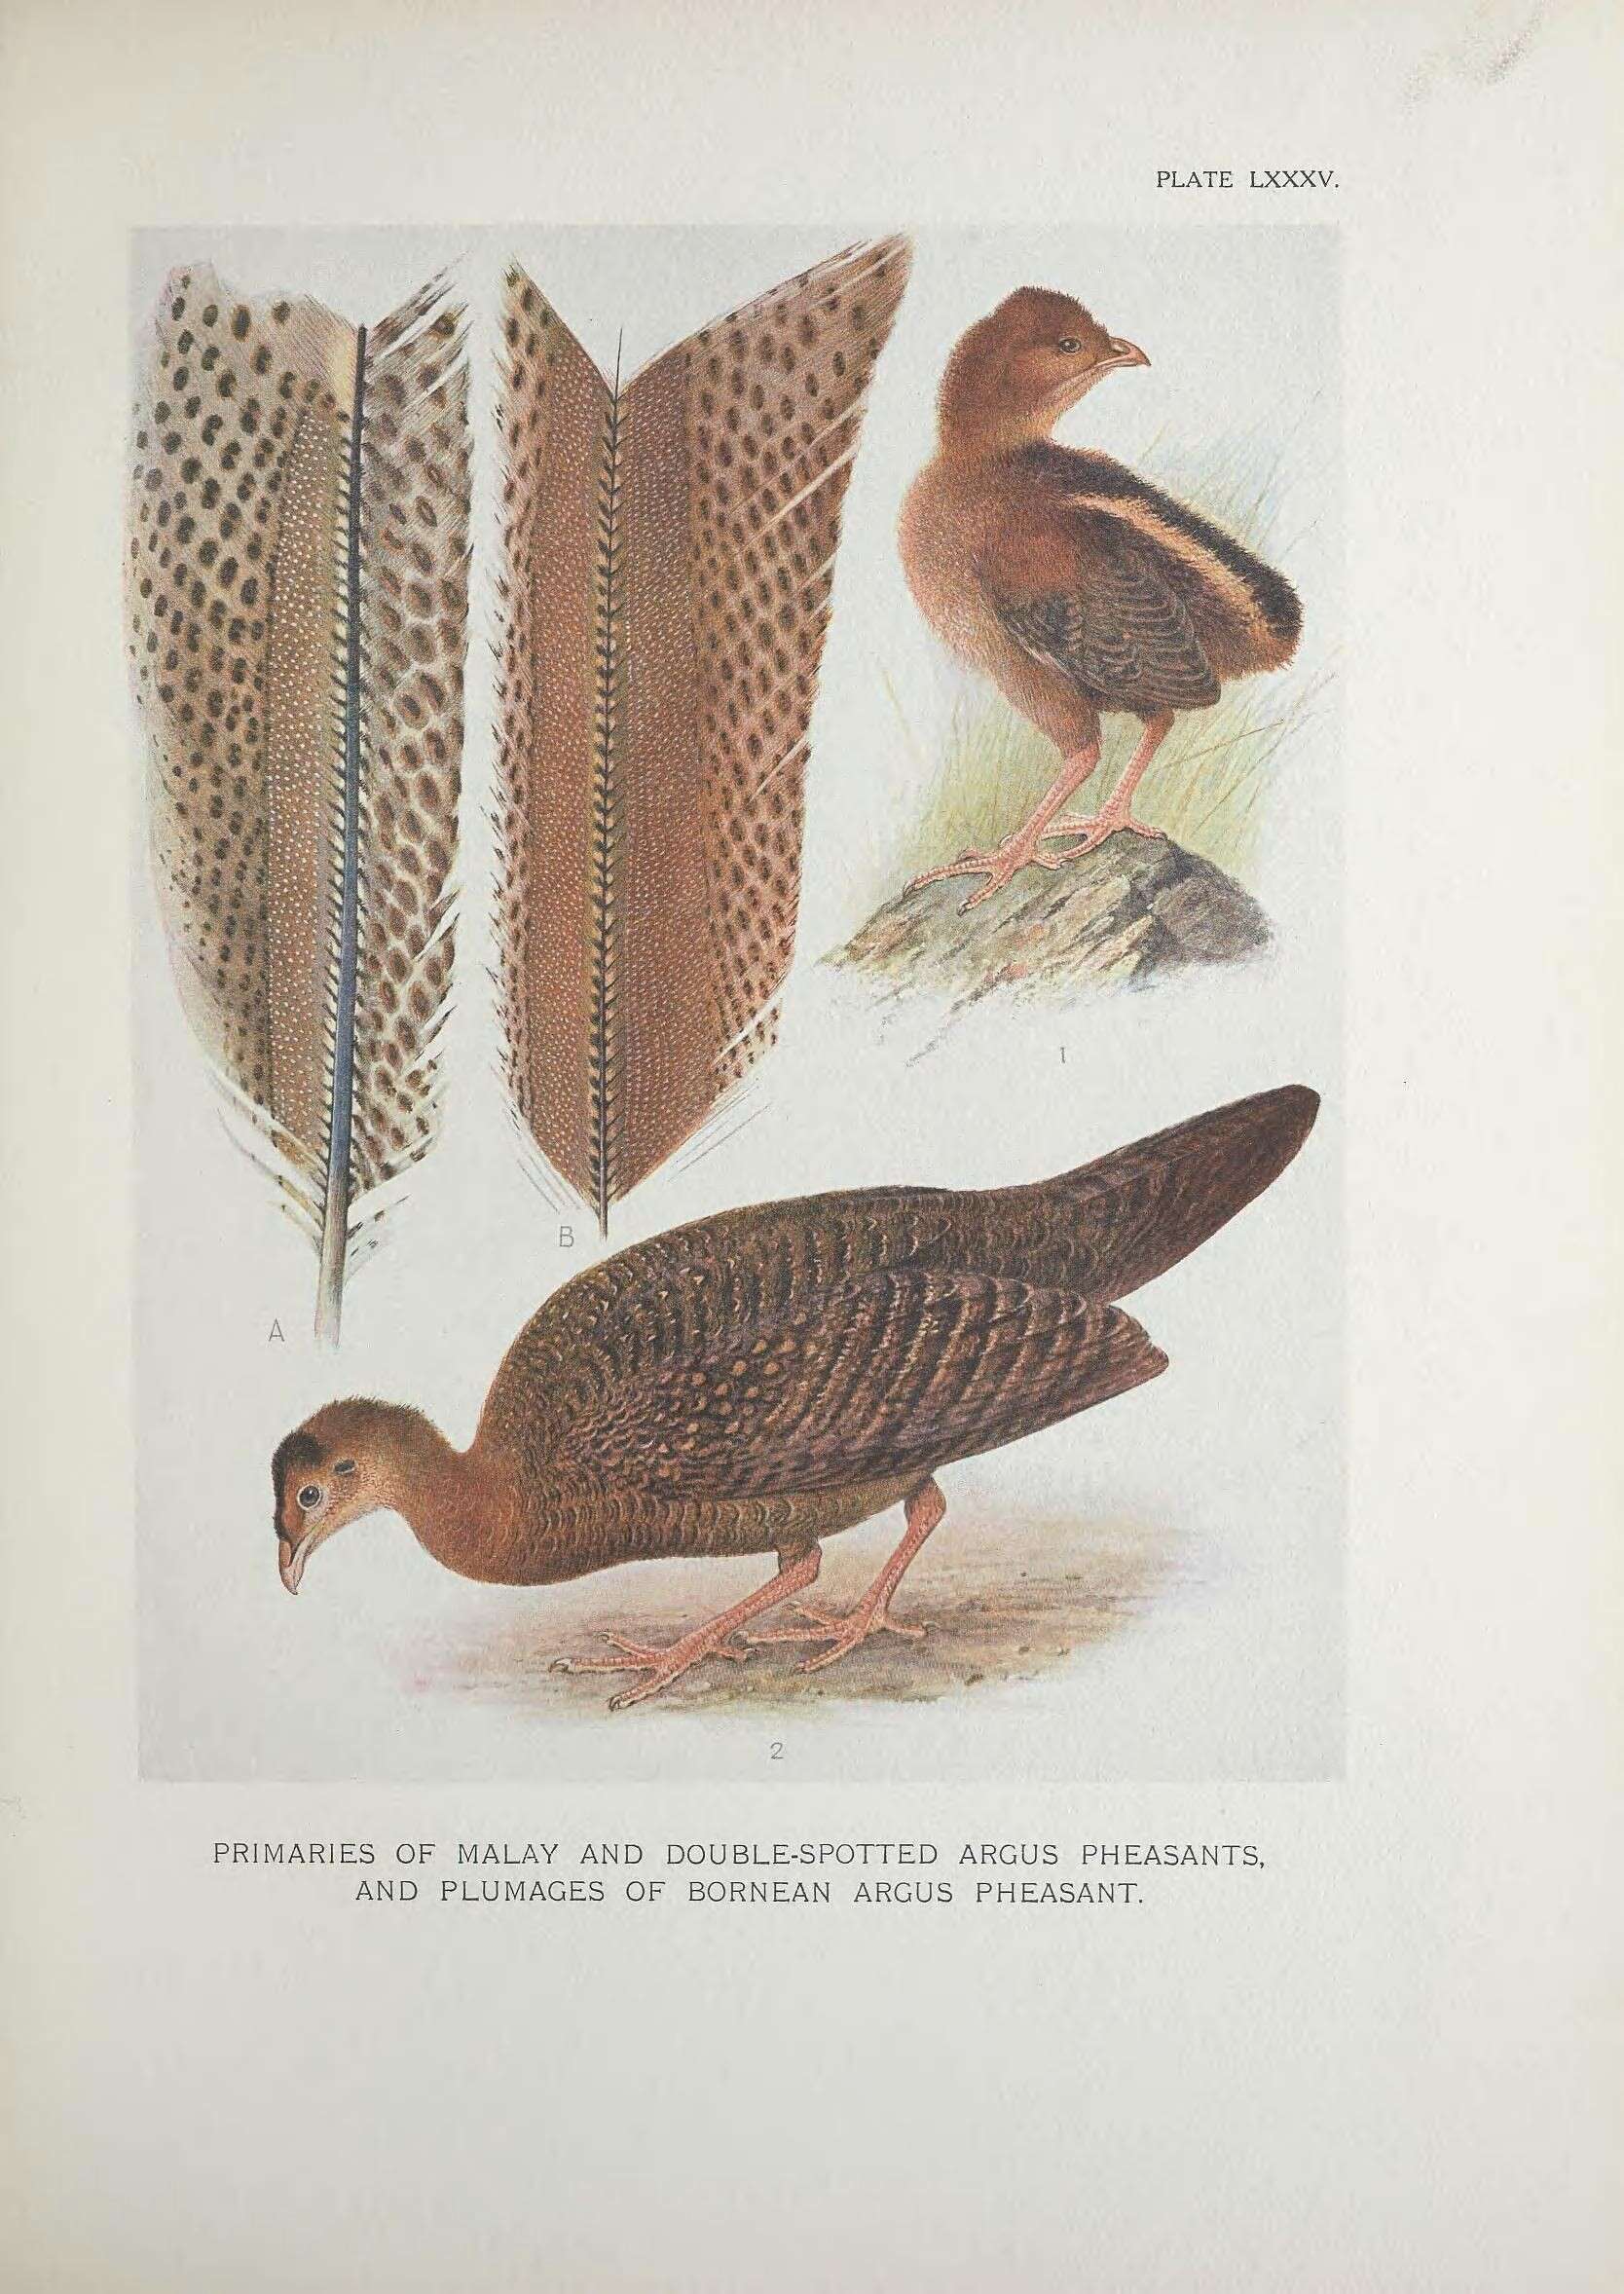 Image of Crested Peacock-pheasant